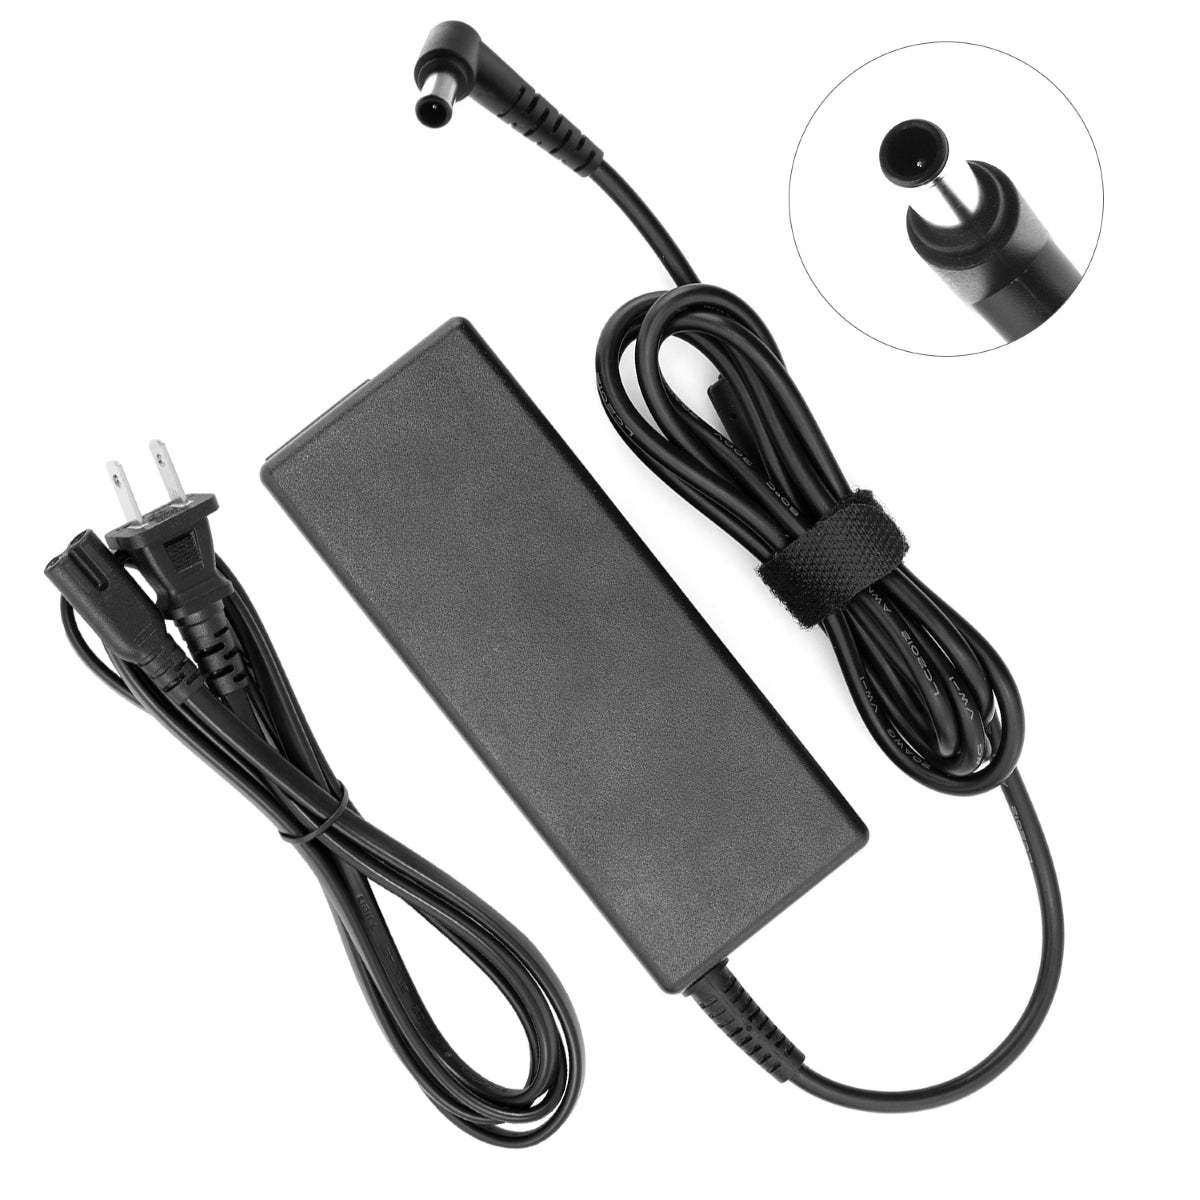 Power Adapter for Samsung LC24F396FHNXZA Monitor